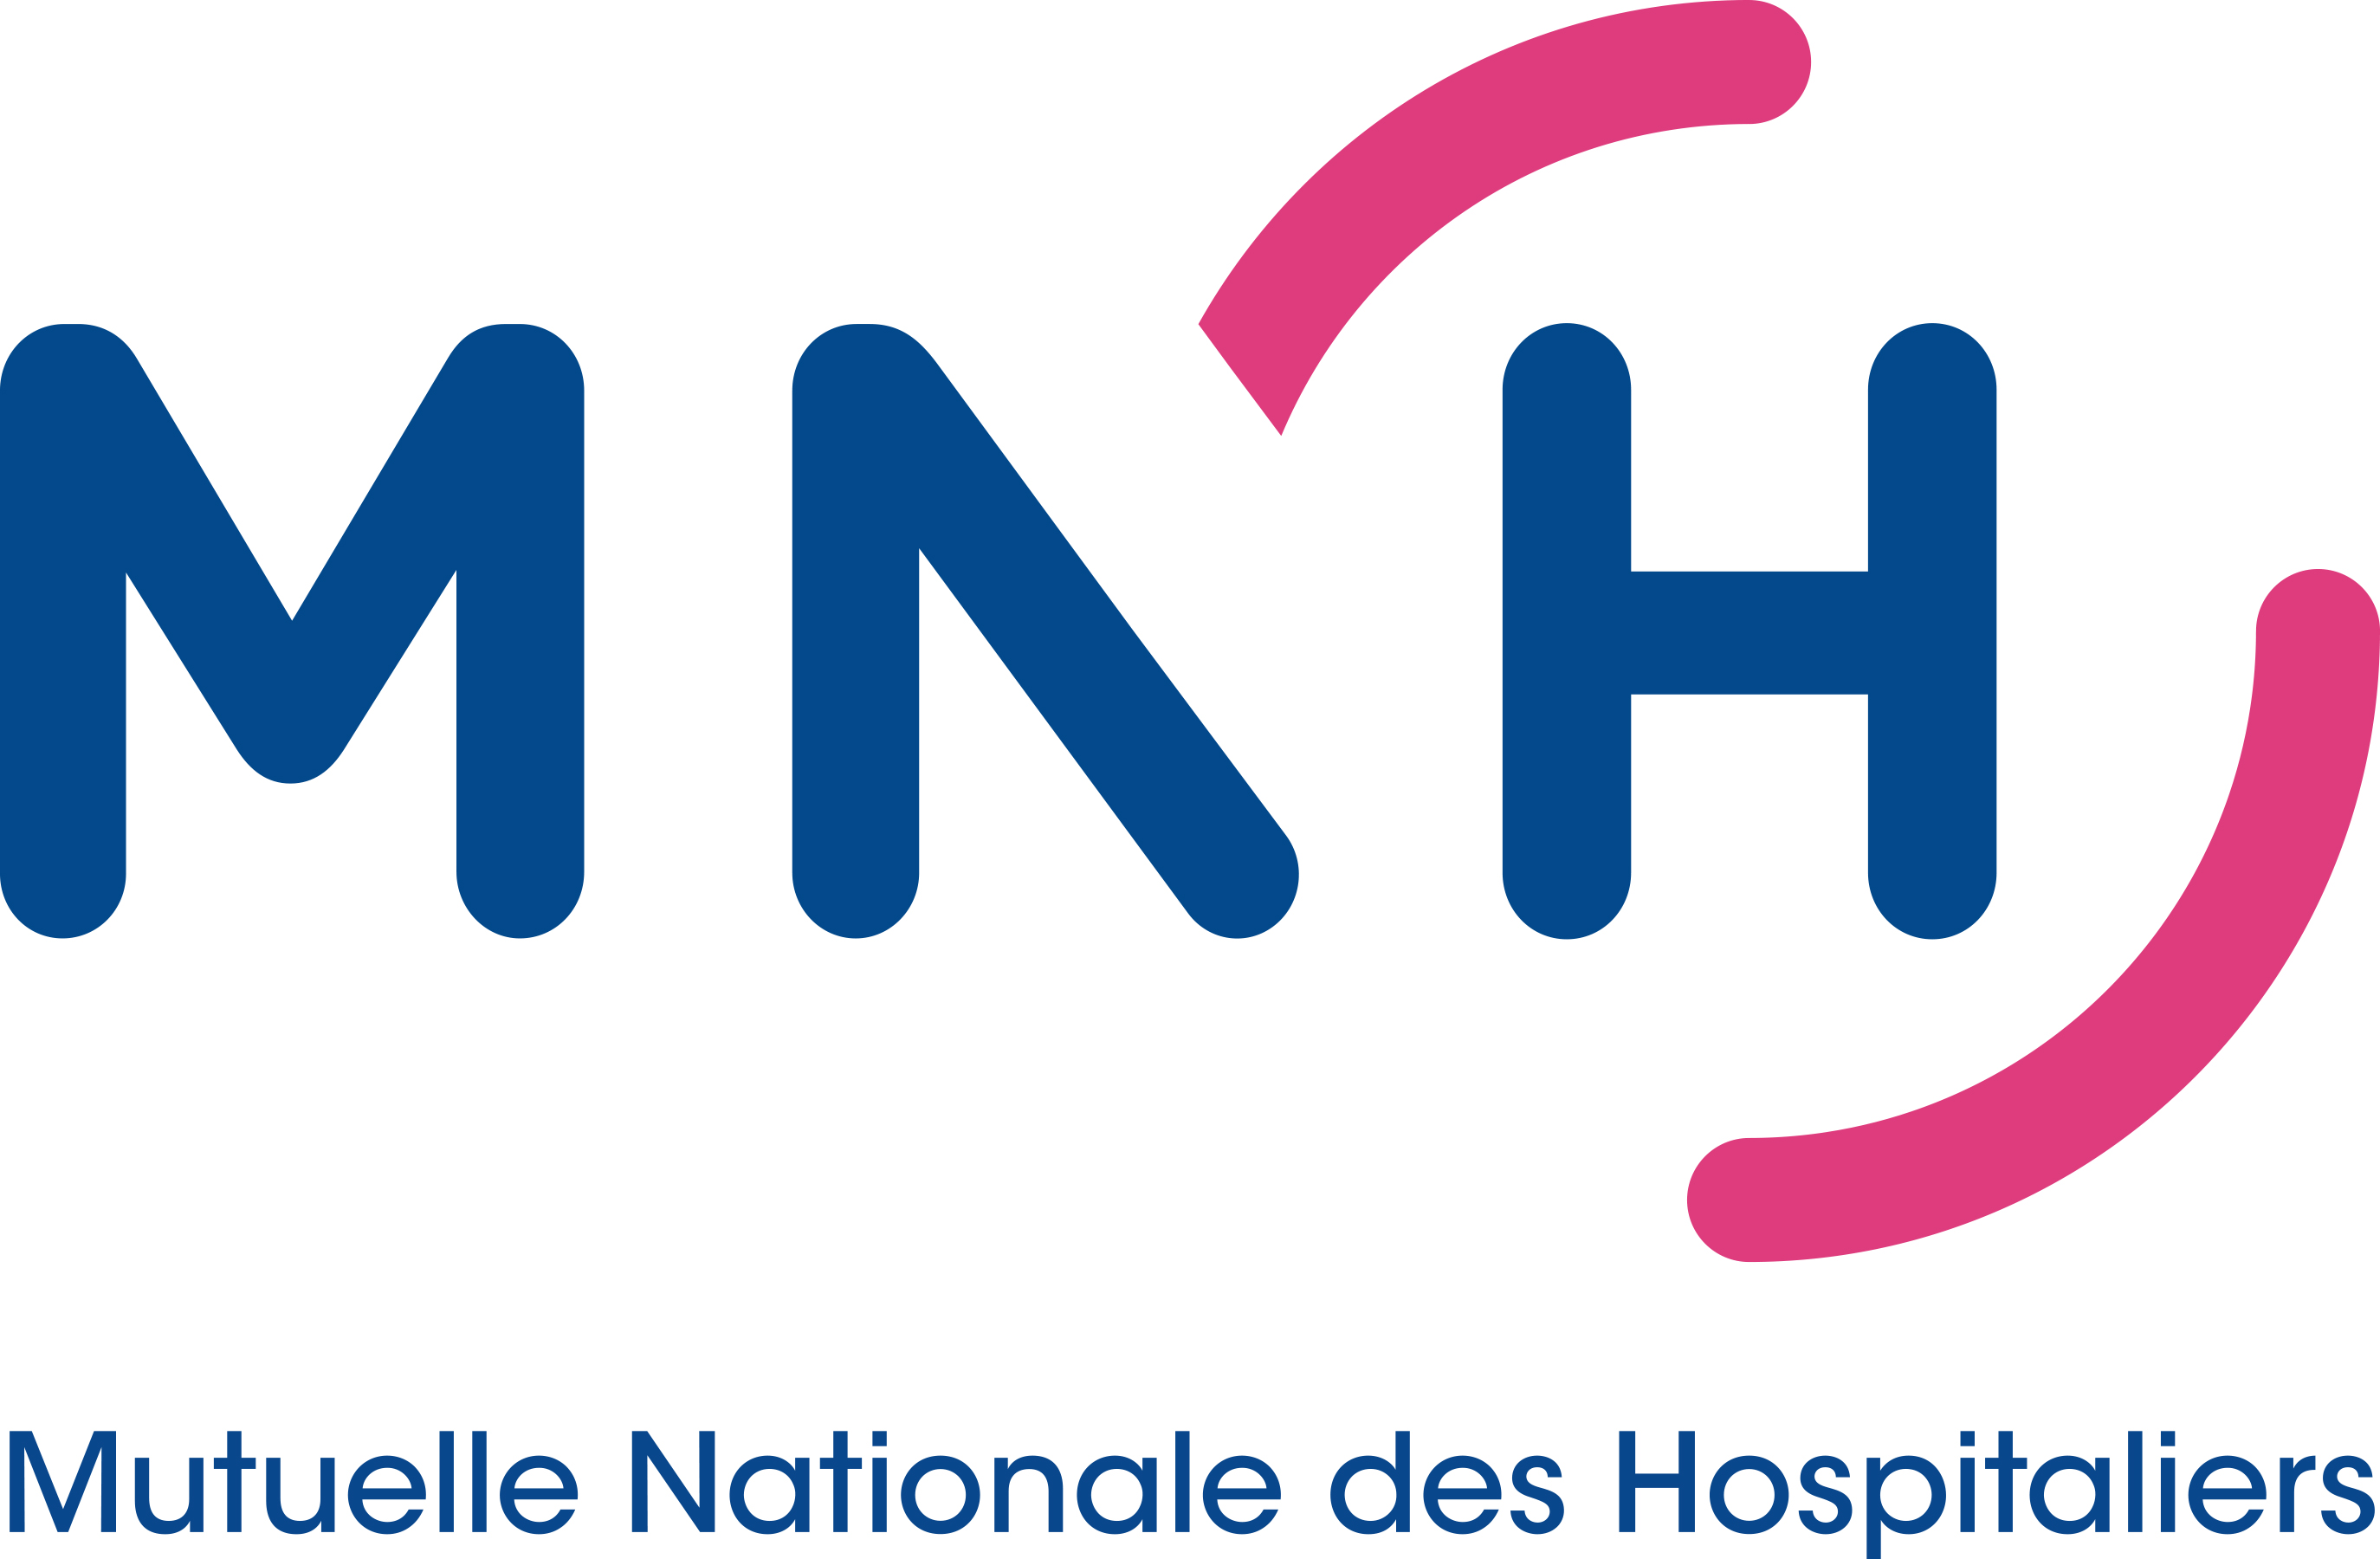 MUTUELLE NATIONALE DES HOSPITALIERS